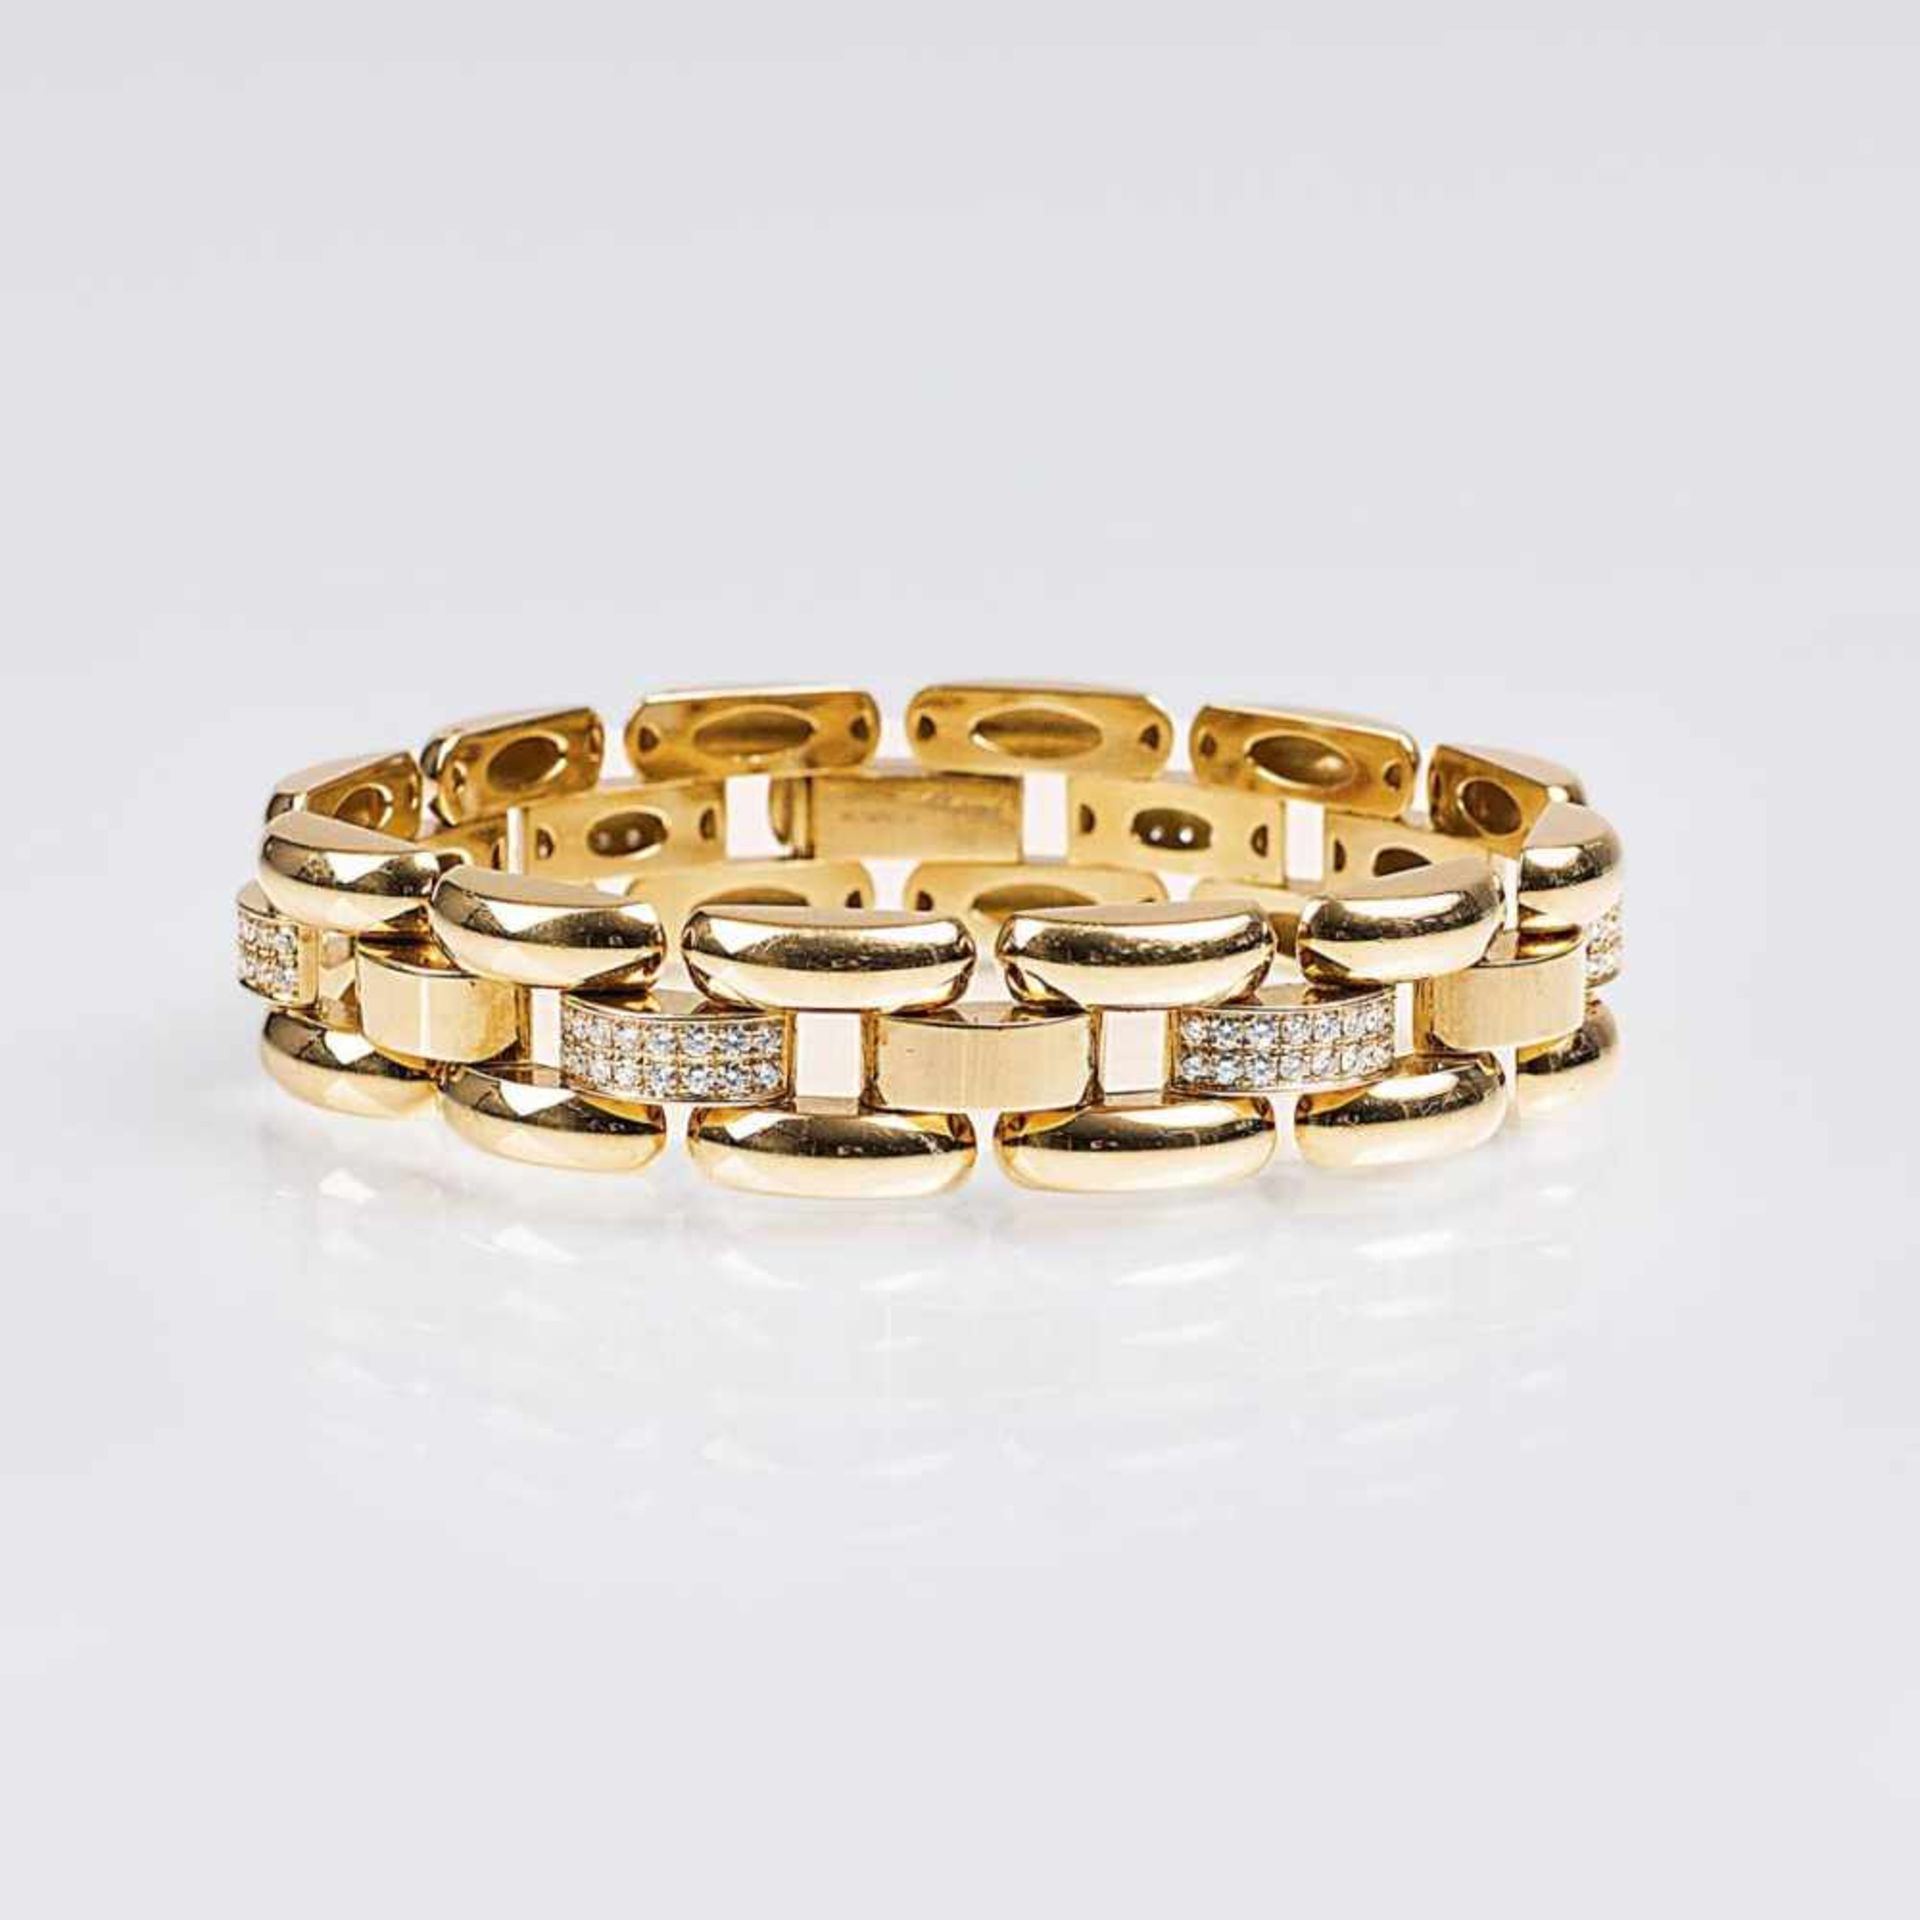 Chopardest. 1860 in SonvilierA Highquality Diamond Bracelet18 ct. yellow gold, marked, numb. 9423398